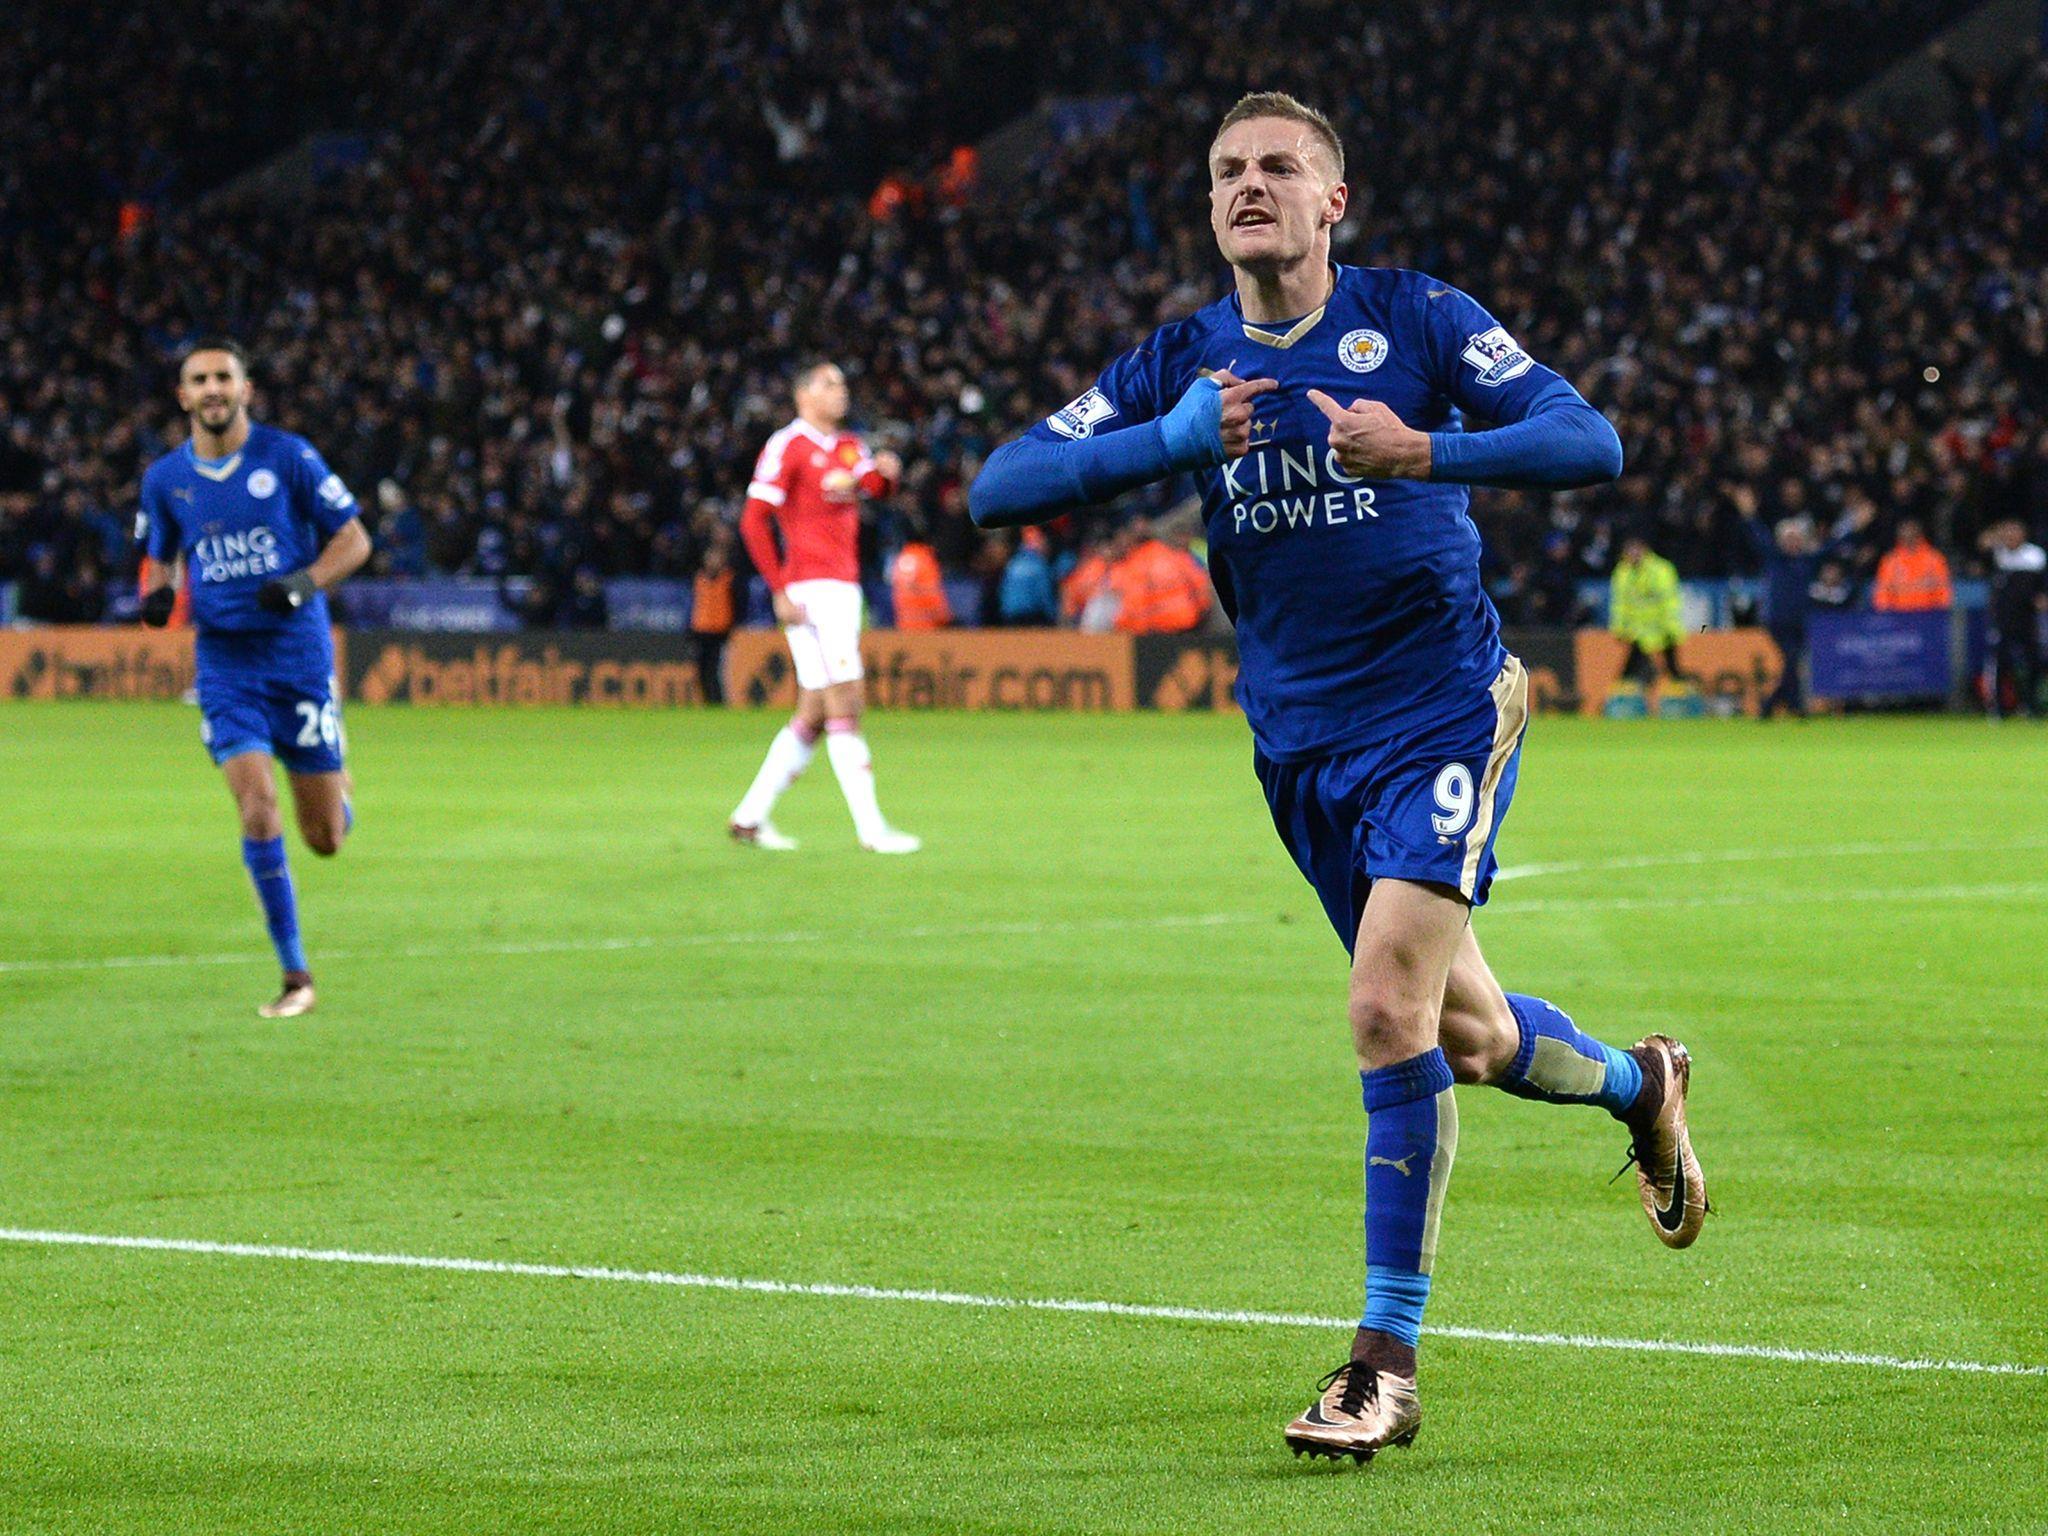 Wallpaper Jamie vardy, Footballer, Leicester city HD, Picture, Image